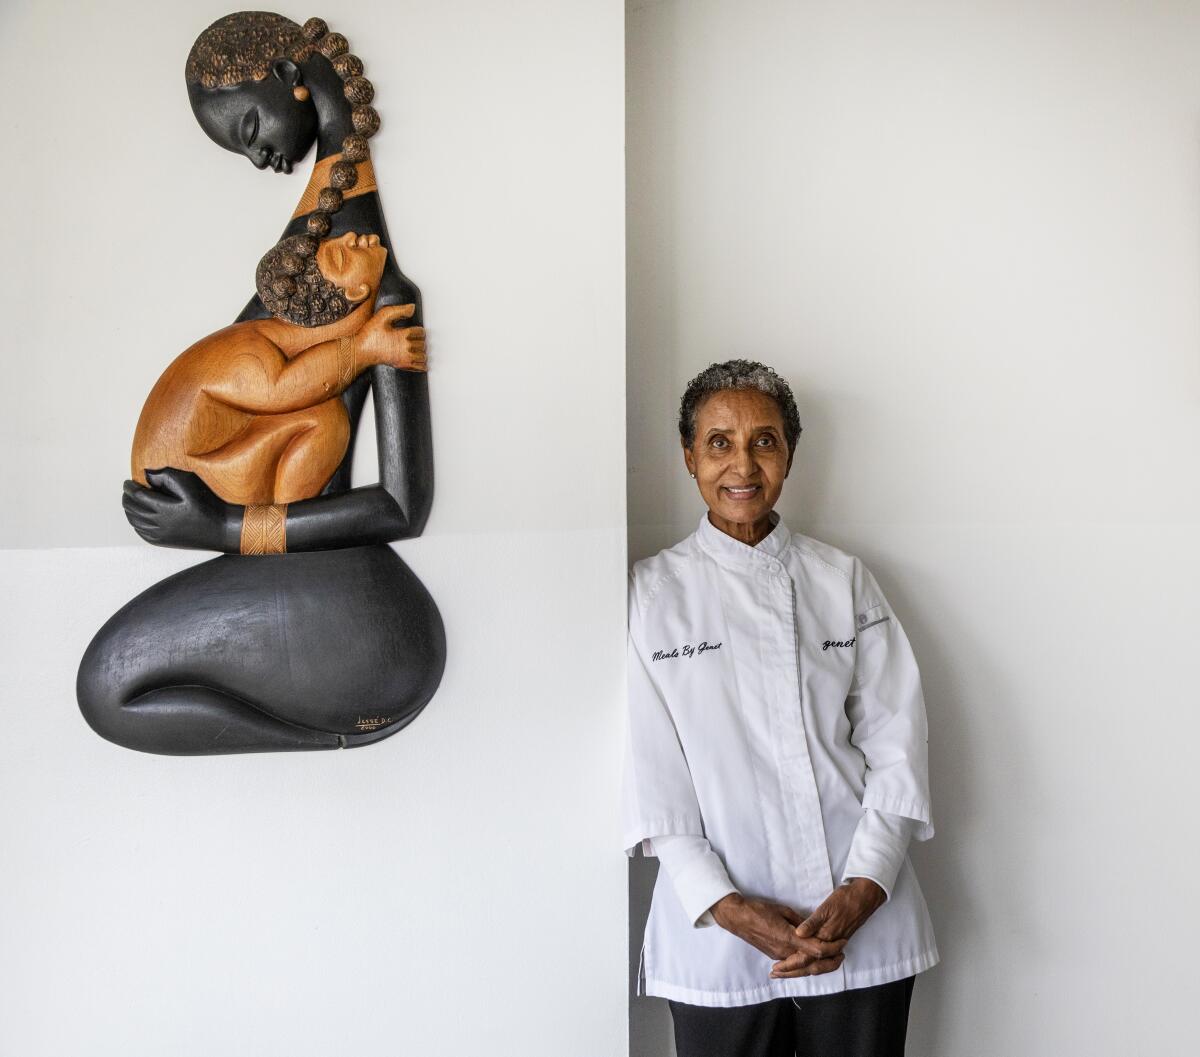 Genet Agonafer next to a Brazilian sculpture of Mary and baby Jesus.